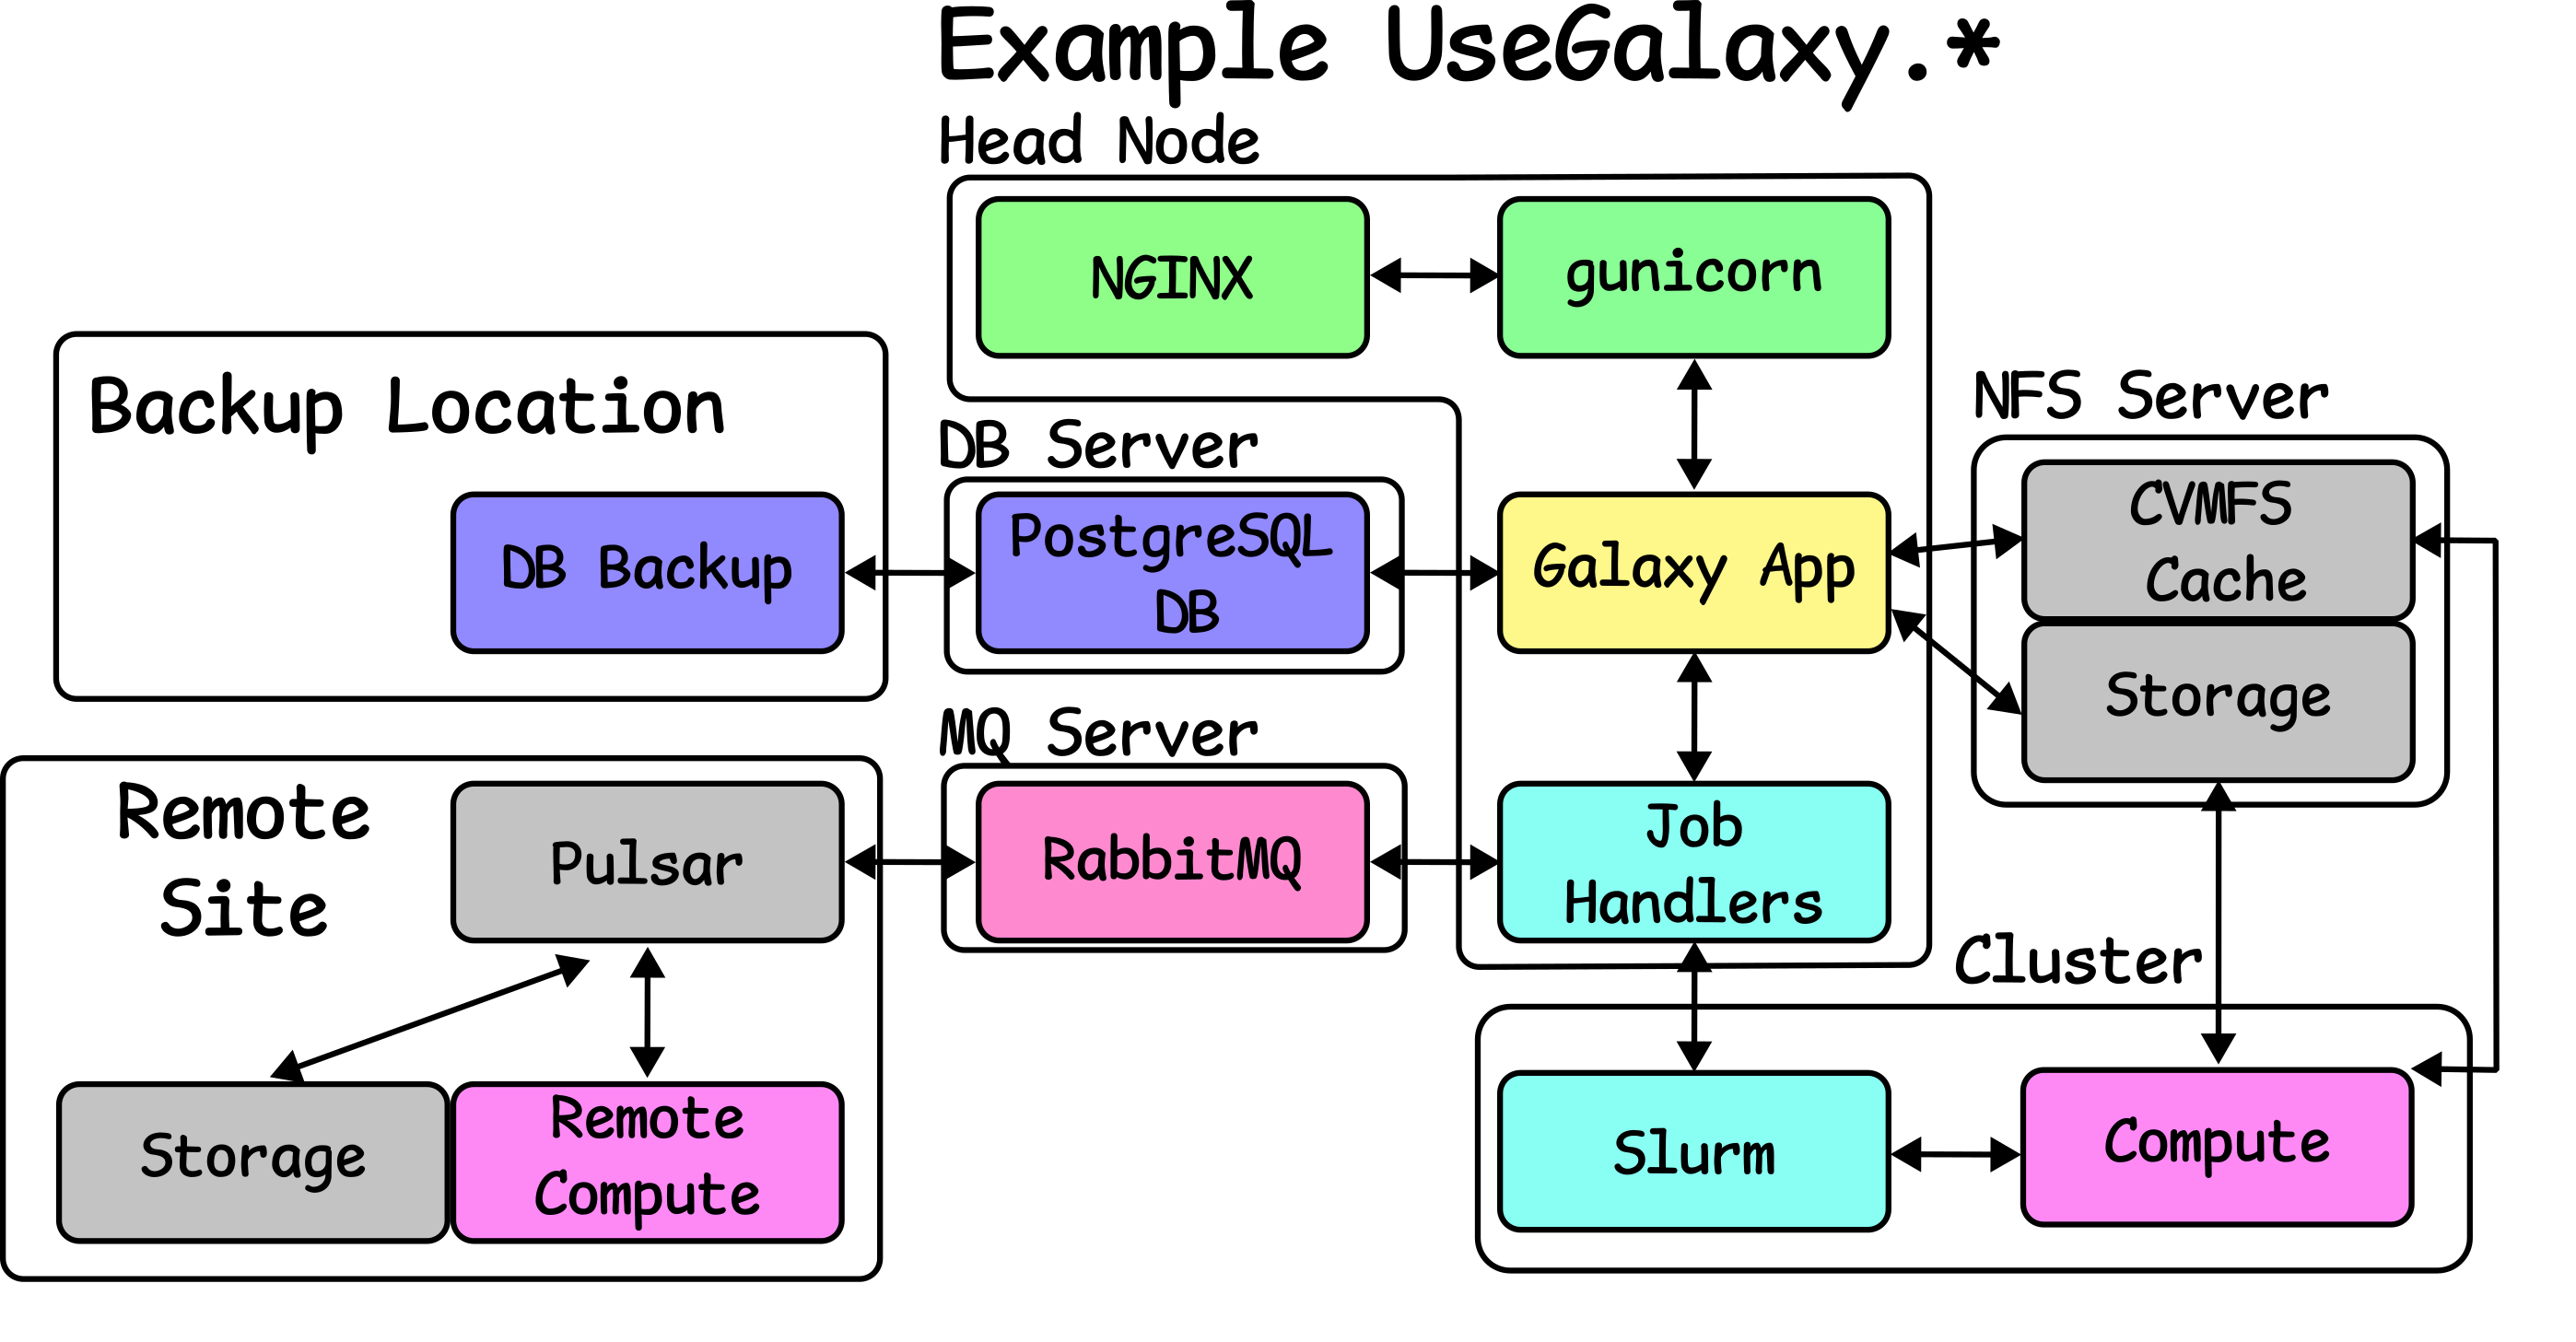 The same deployment as before, but now they are segmented differently. Postgres and Rabbit MQ on their own hosts, storage on an NFS server, slurm and compute on a Cluster, and then nginx, gunicorn, galaxy, and job handlers on a Head Node